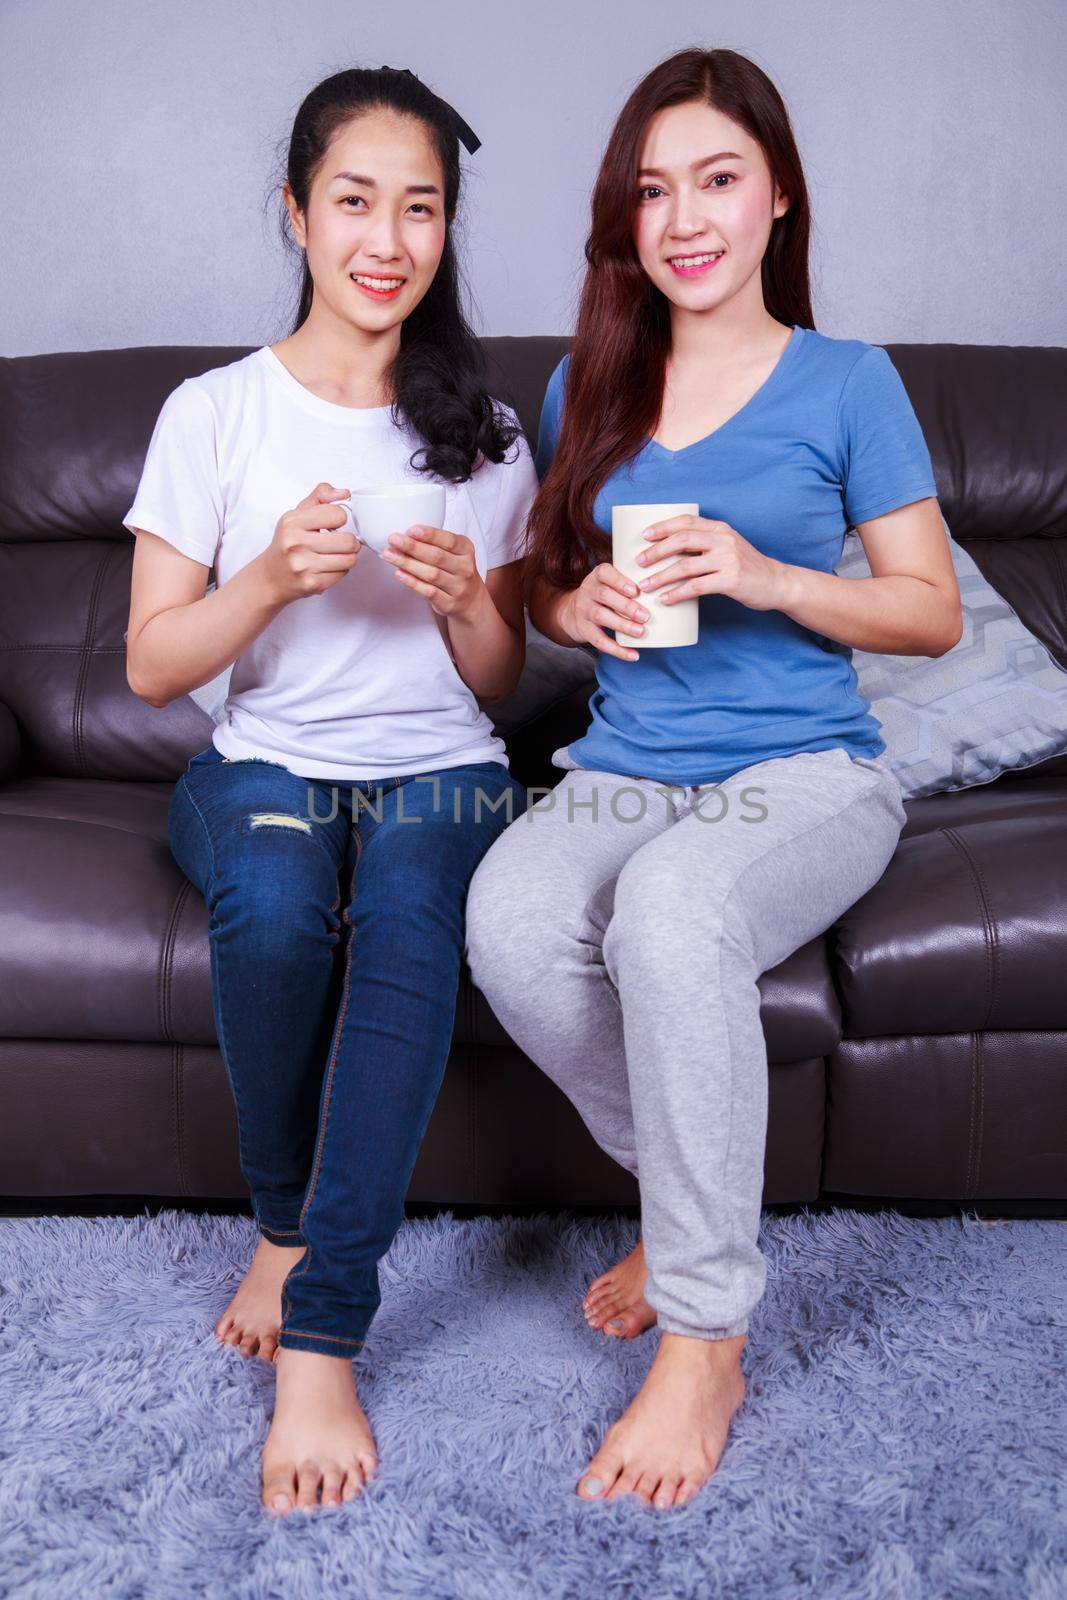 two best friends talking and drinking a cup of coffee on sofa in living room at home